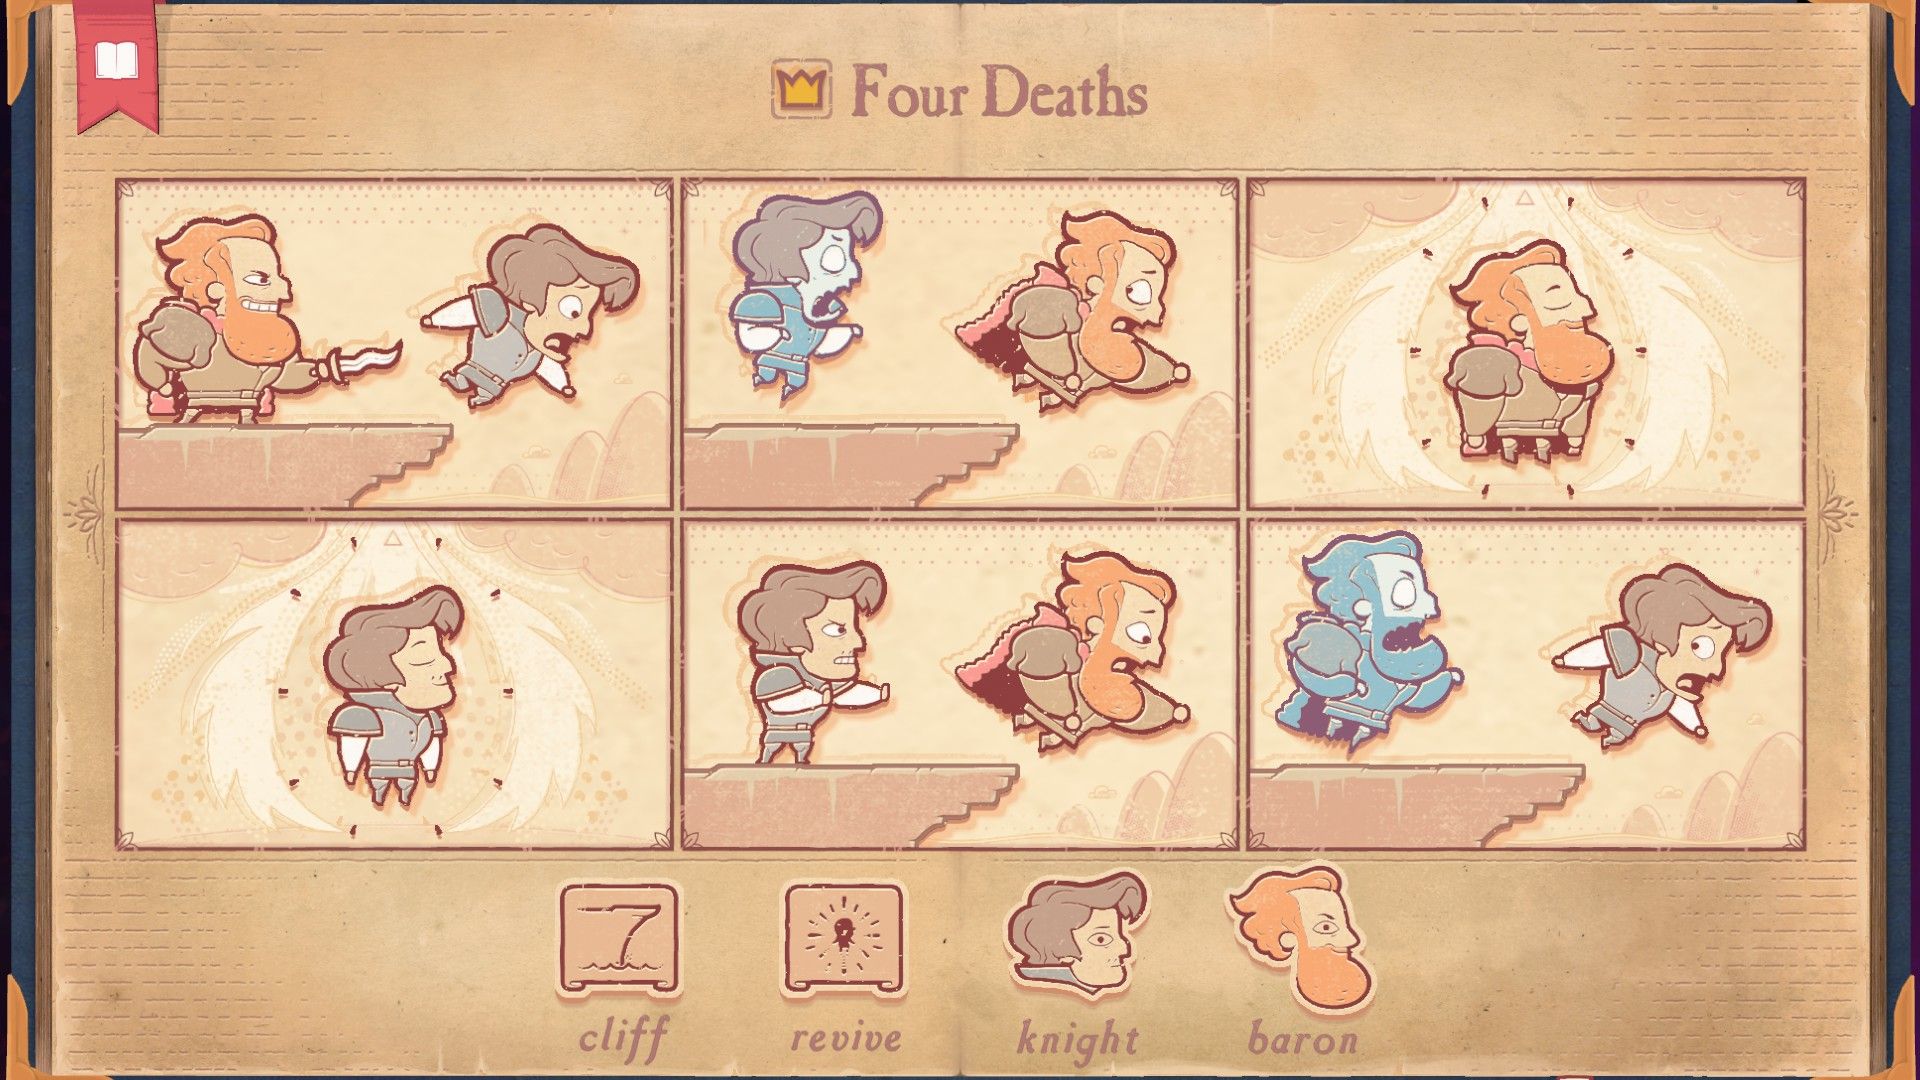 The solution for the Rivals section of Storyteller, showing four deaths.